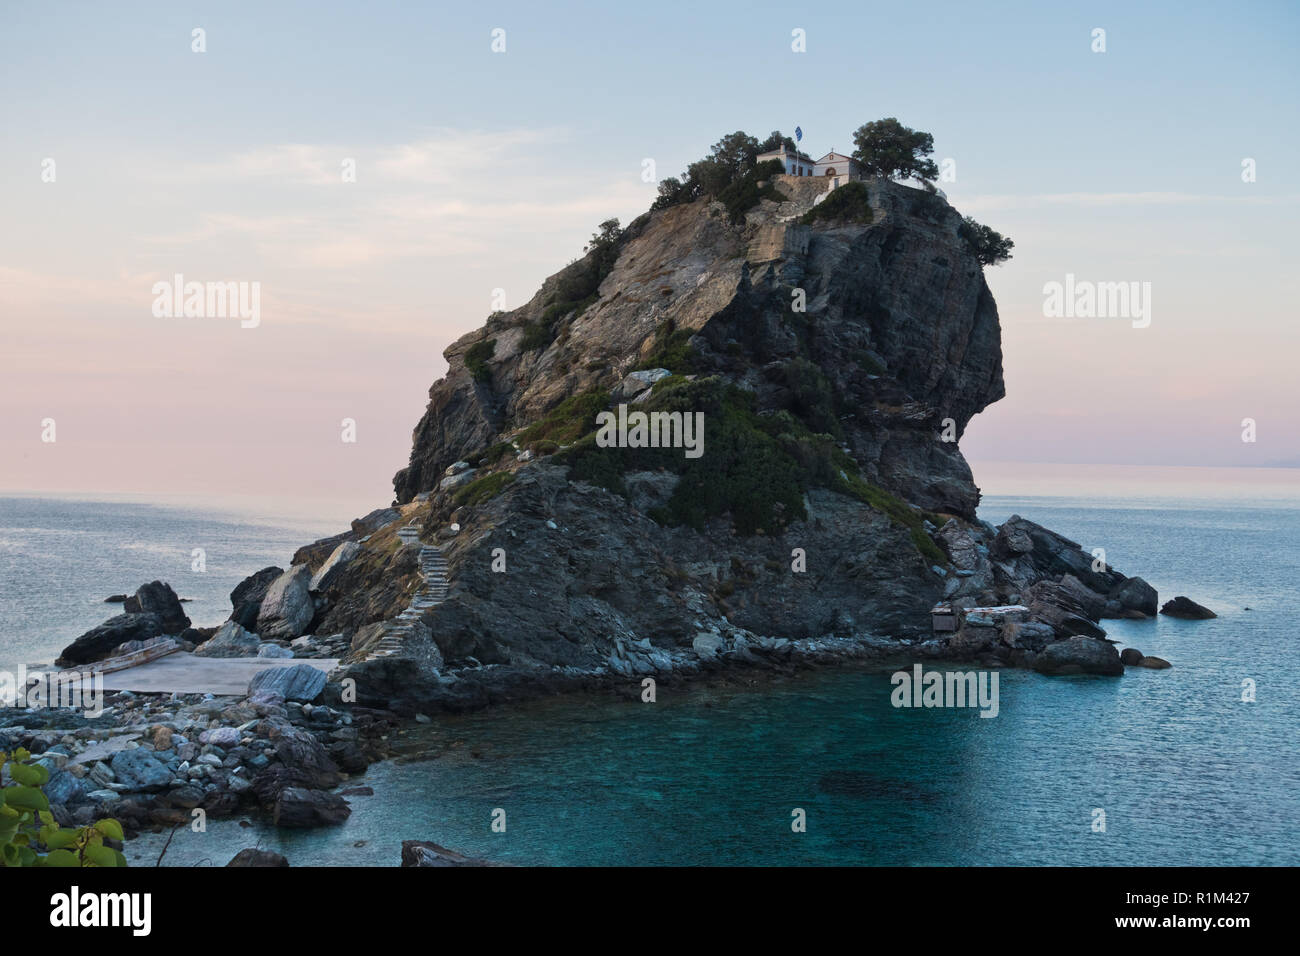 The church of Agios Ioannis Kastri on a rock at sunset, famous from Mamma  Mia movie scenes, Skopelos Island, Greece Stock Photo - Alamy